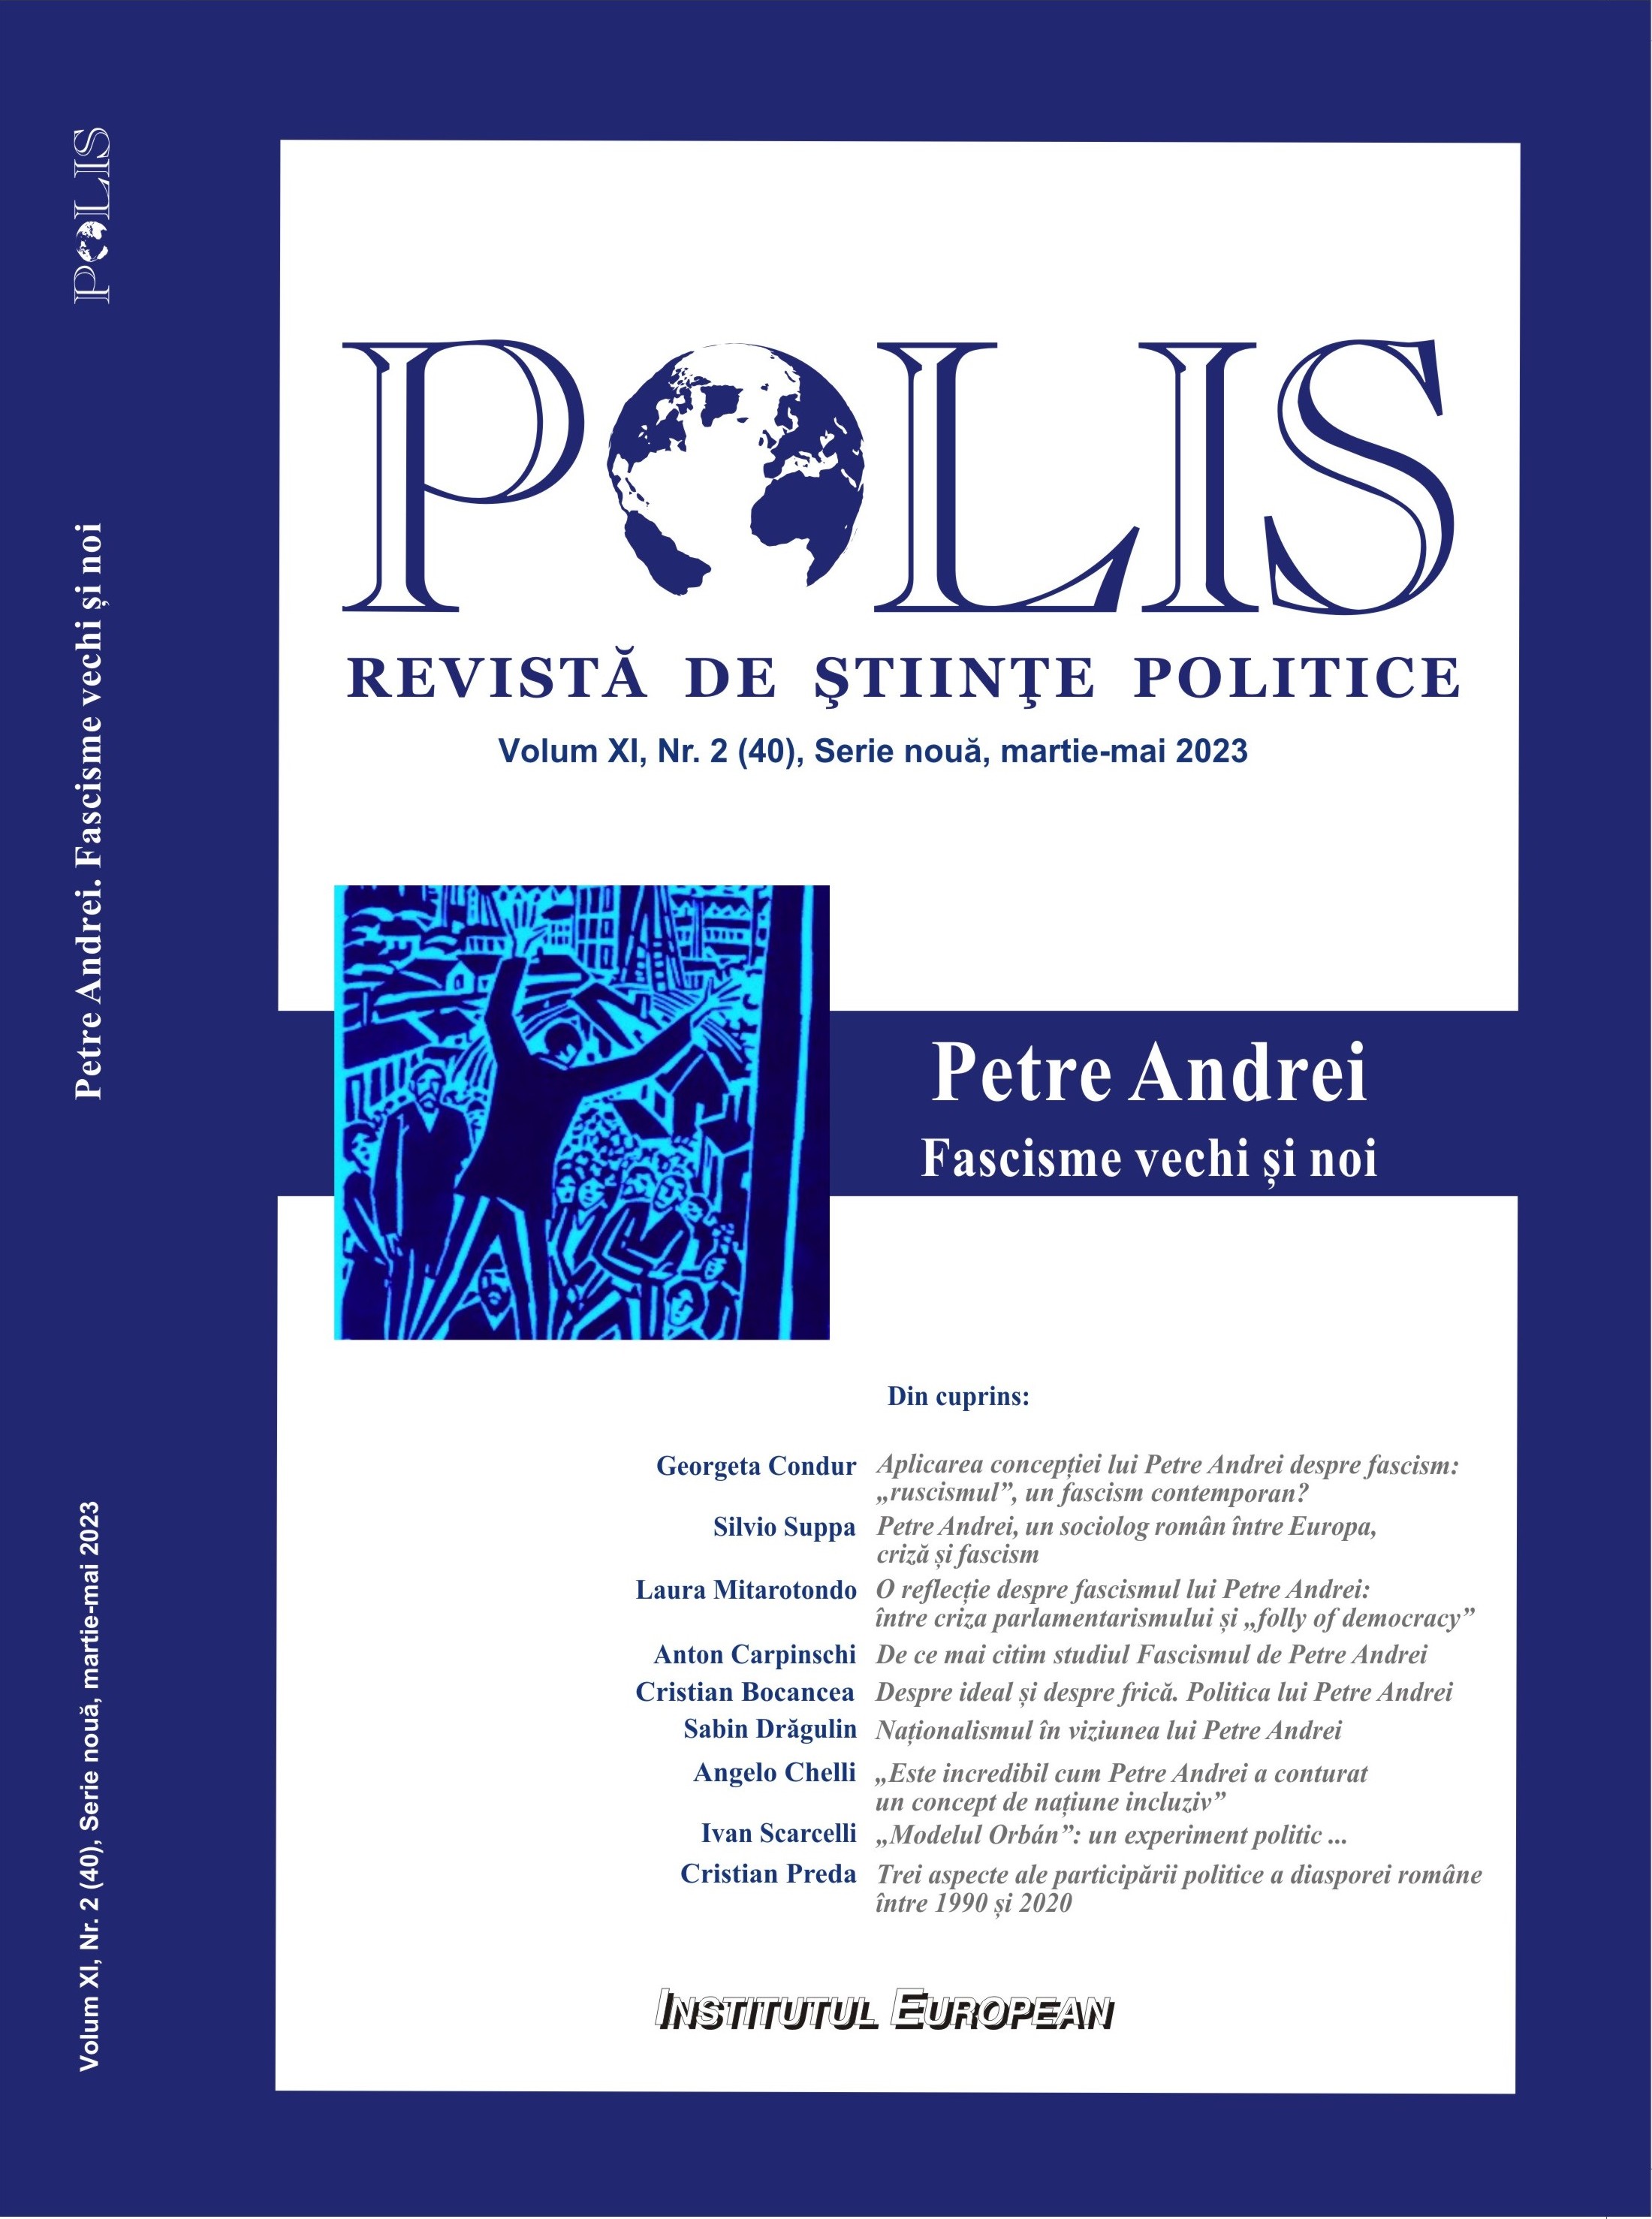 Petre Andrei, a Romanian sociologist between Europe, crisis and fascism Cover Image